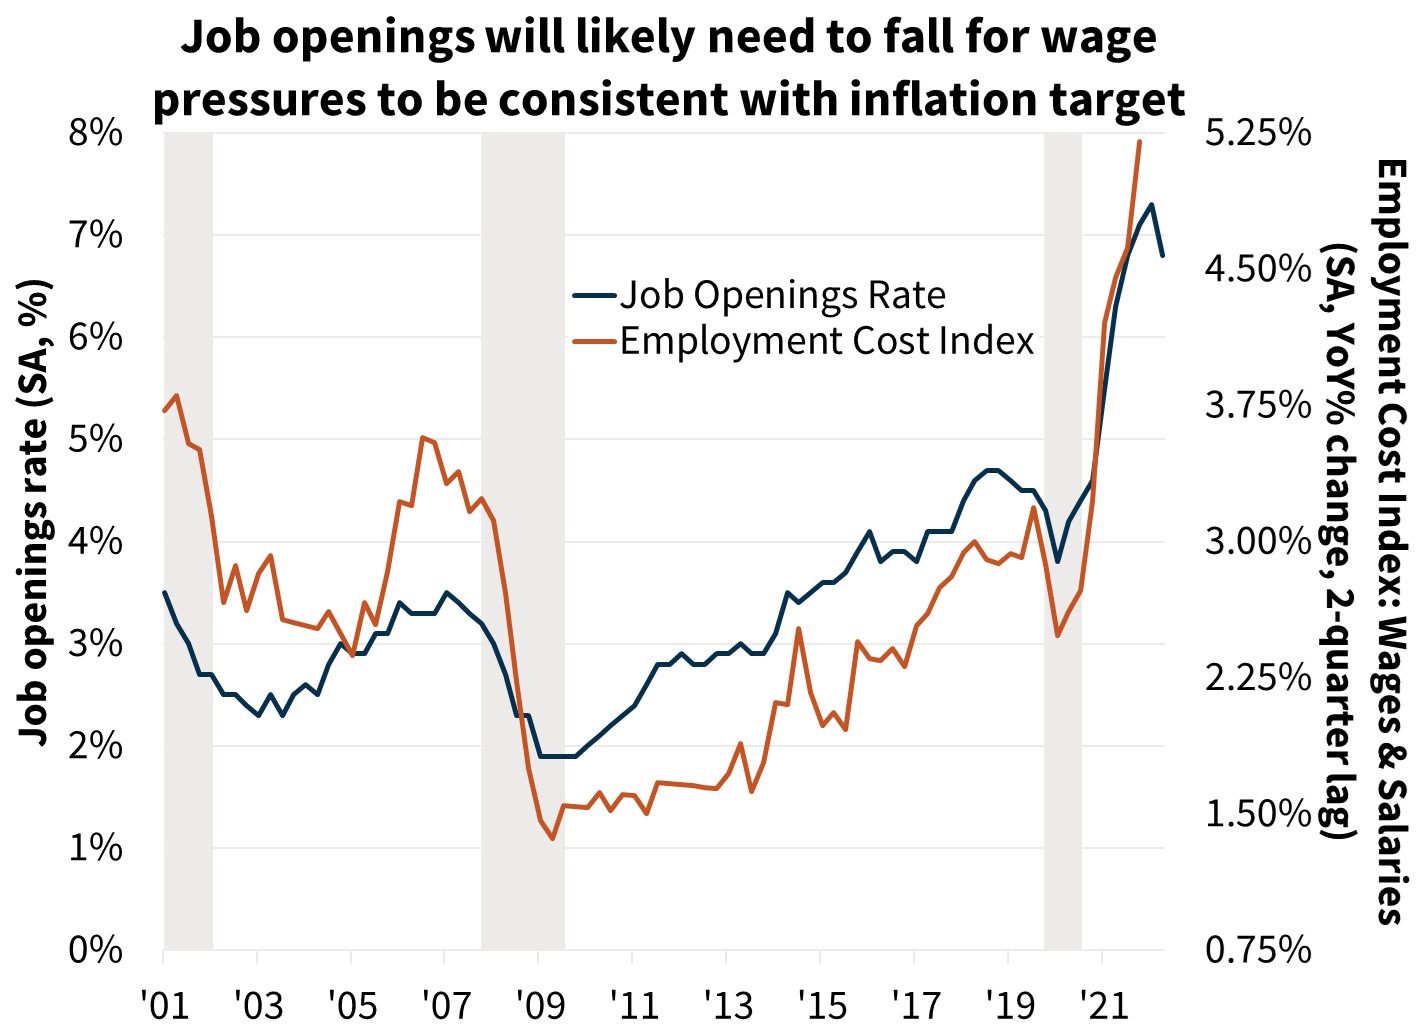  Job openings will likely need to fall for wage pressures to be consistent with inflation target 